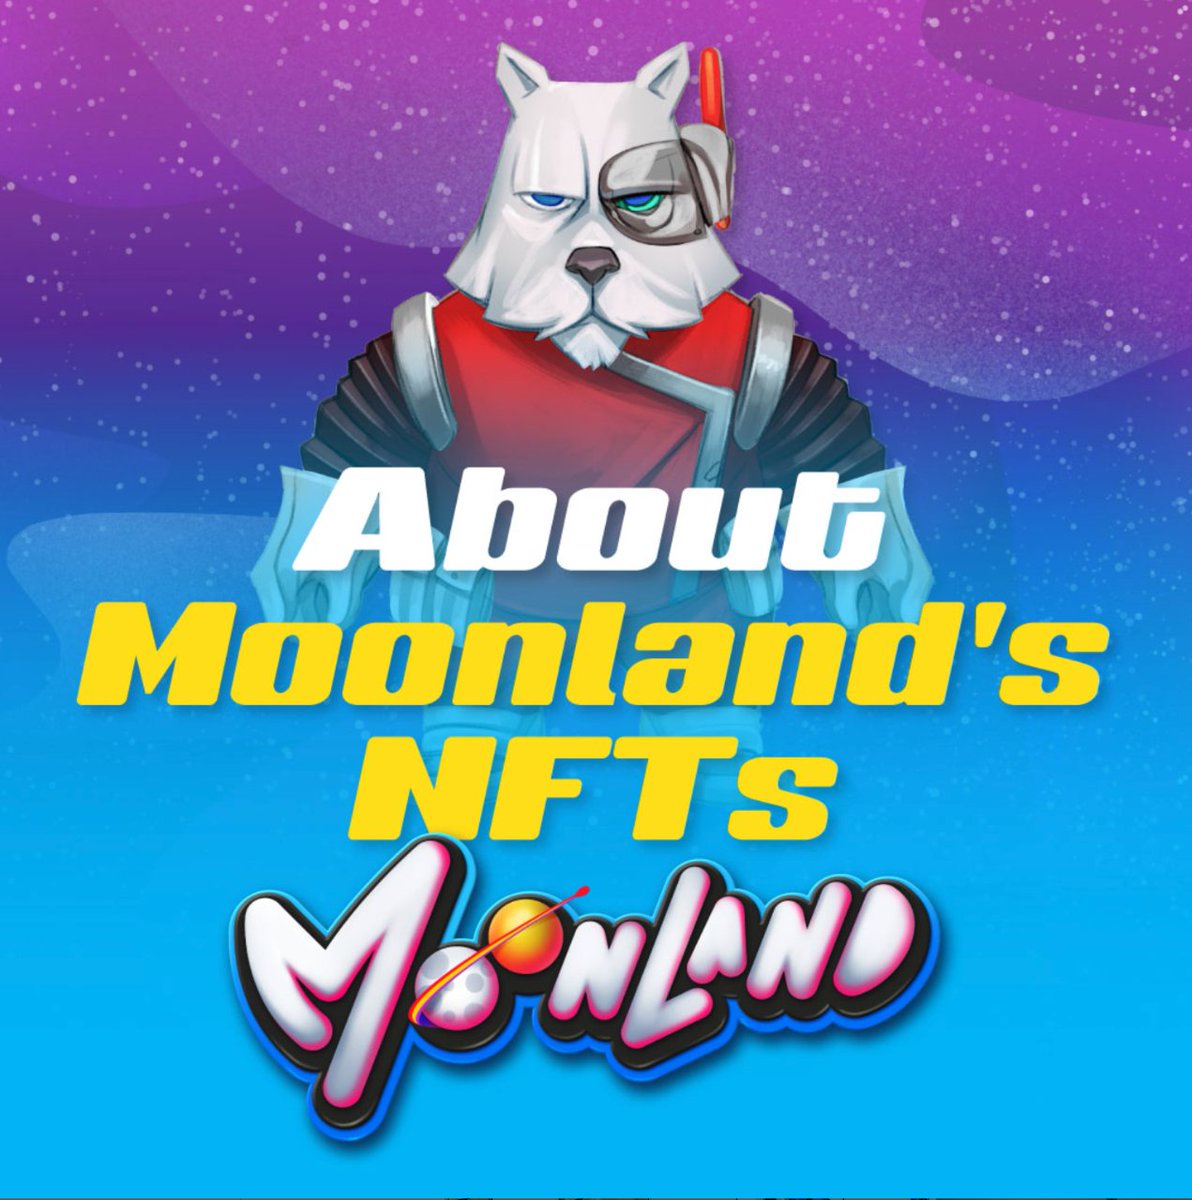 Our goal is to shatter boundaries and revolutionize the way you play. With the ability to trade our #NFTs across partner games, you can expand your universe of interactive experiences and create your own vault of assets #Moonland #Metaverse #cryptogame #cryptogaming #nftcommunity